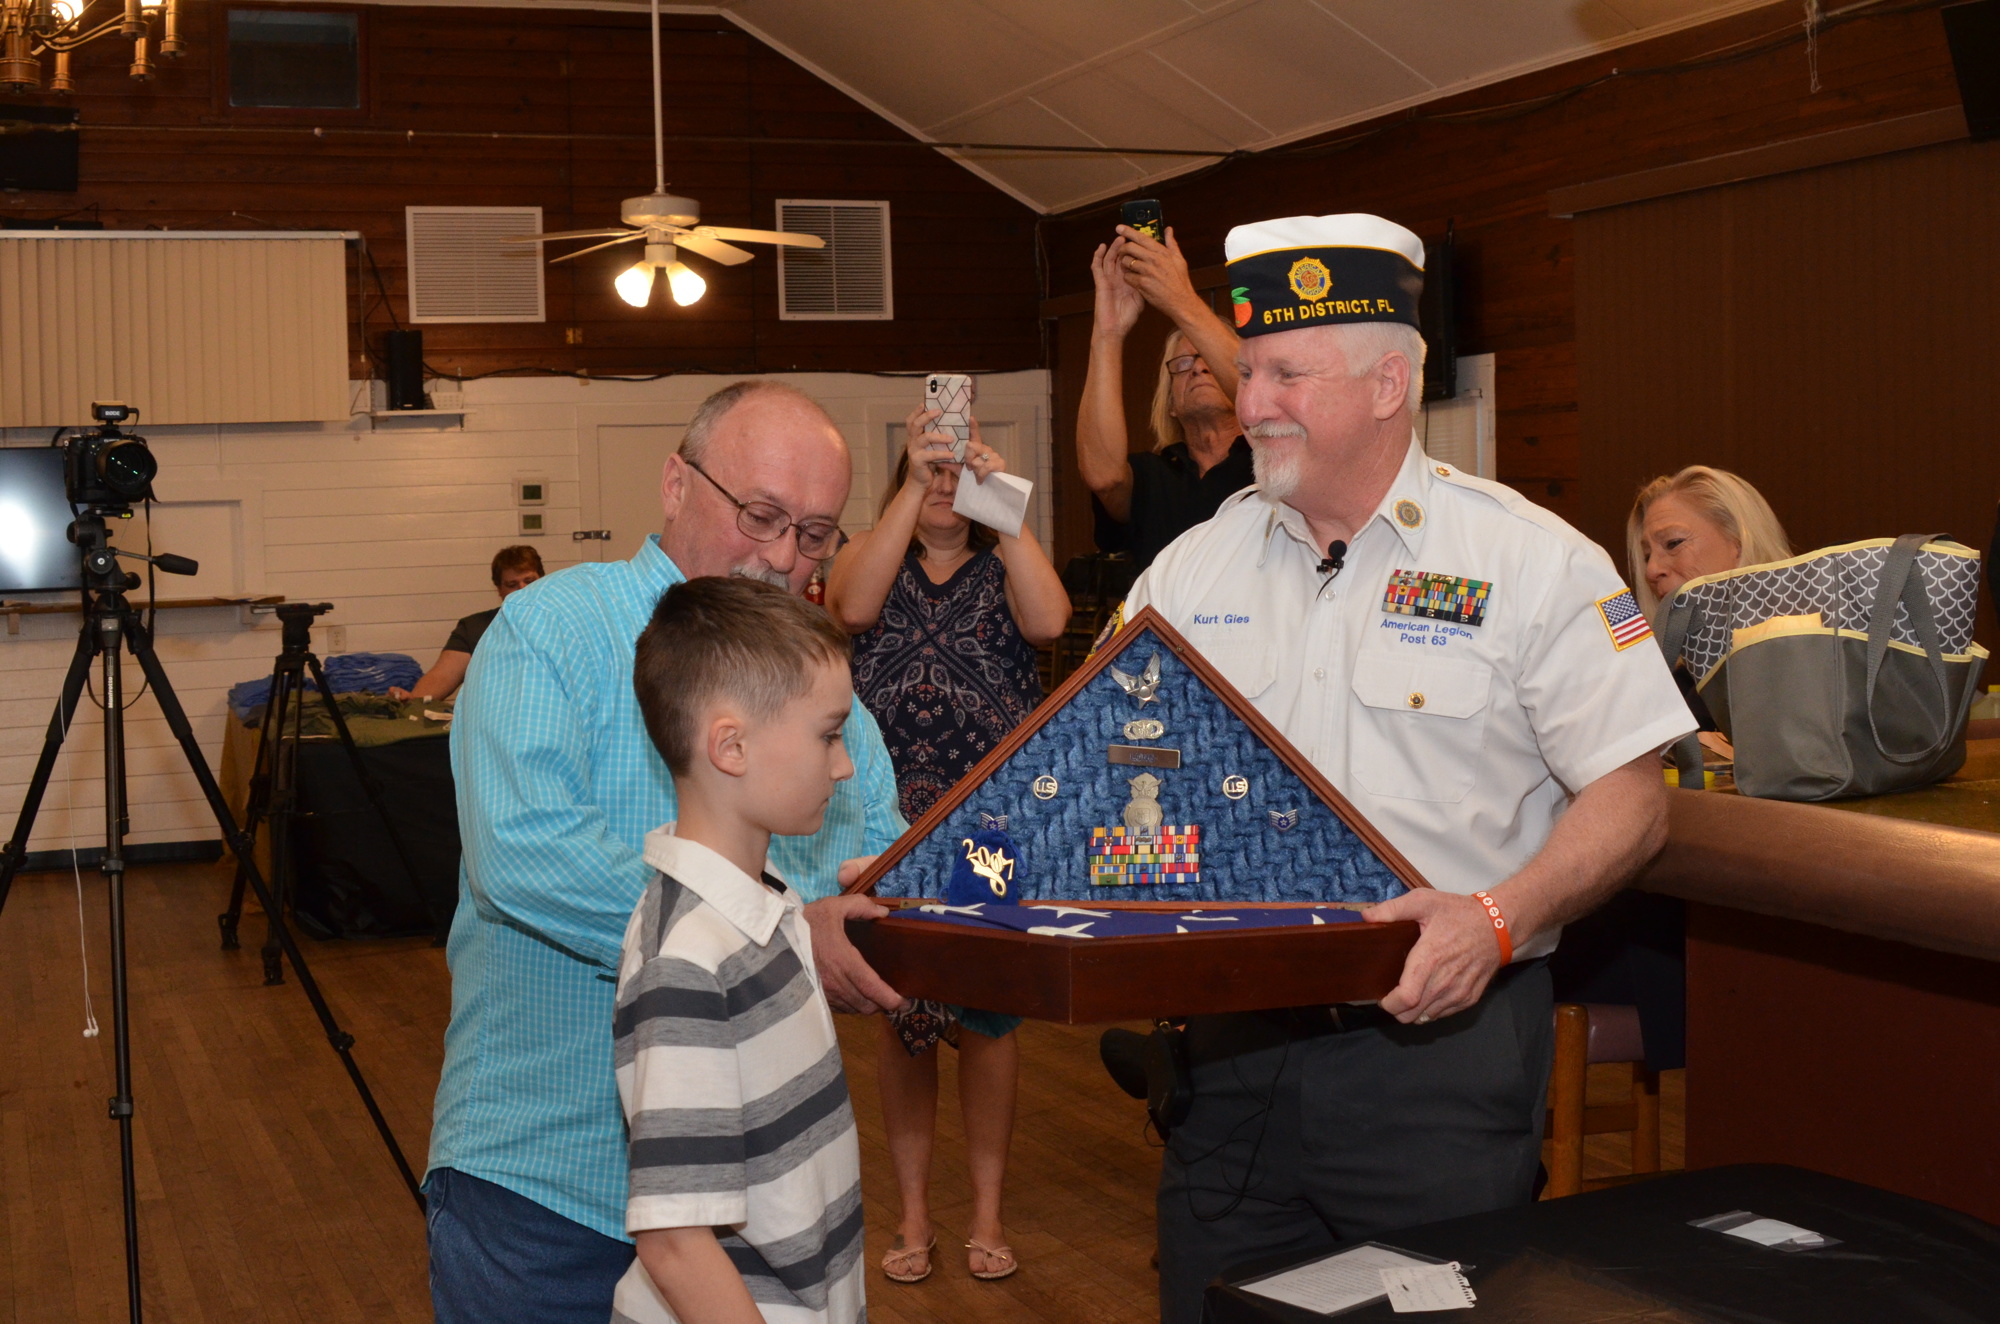 Post Commander Kurt Gies presents the shadow box to Charlie Long and his grandson, Trip Long.